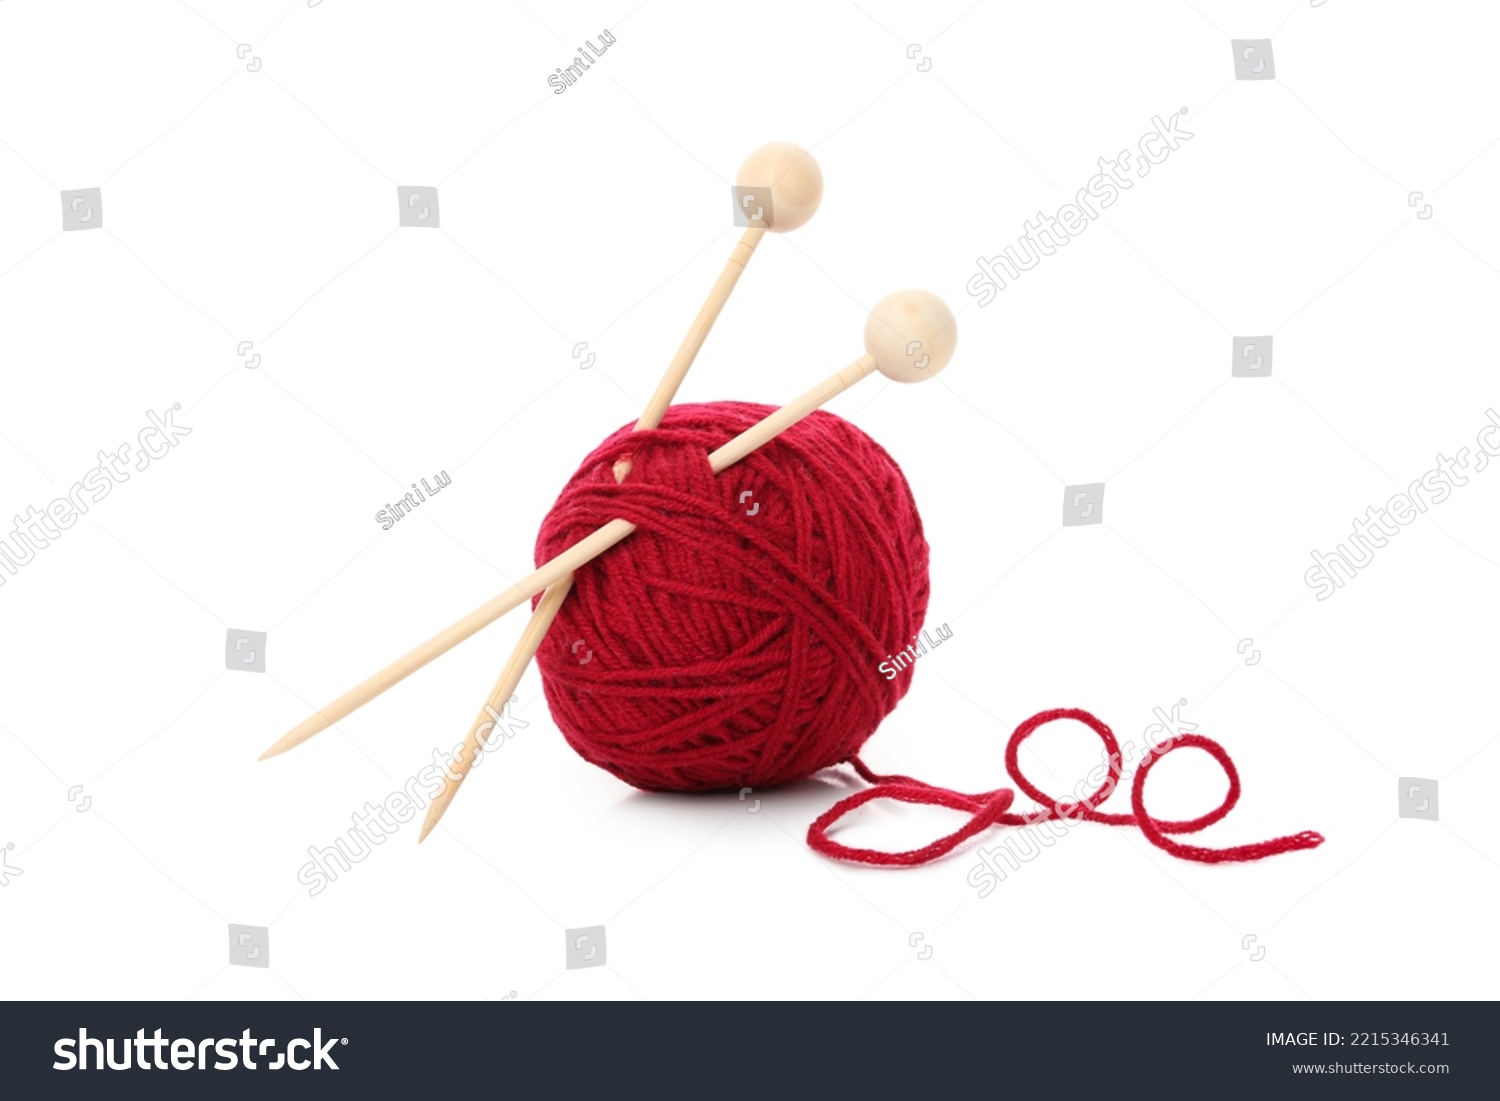 Red yarn ball with knitting needles, isolated on white background. #2215346341